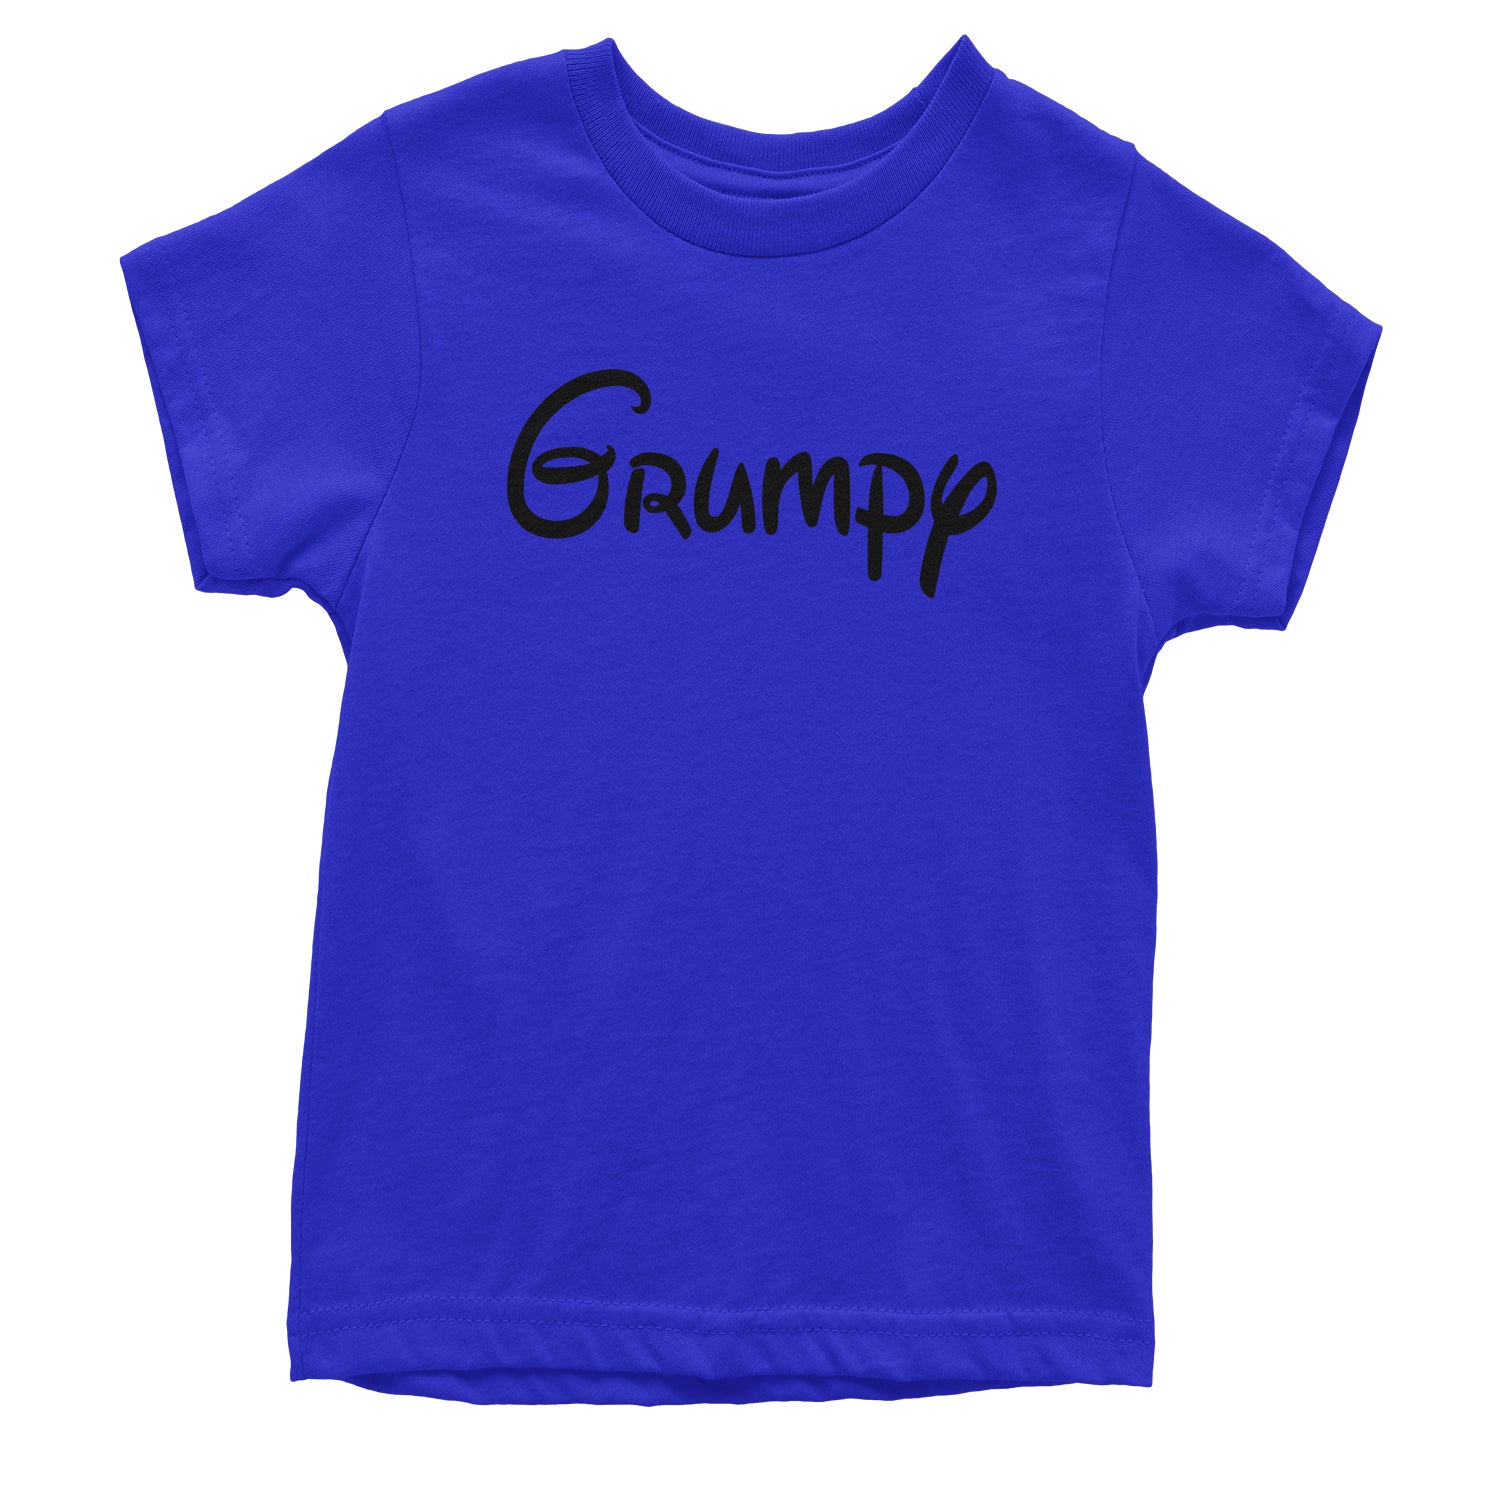 Grumpy - 7 Dwarfs Costume Youth T-shirt and, costume, dwarfs, group, halloween, matching, seven, snow, the, white by Expression Tees